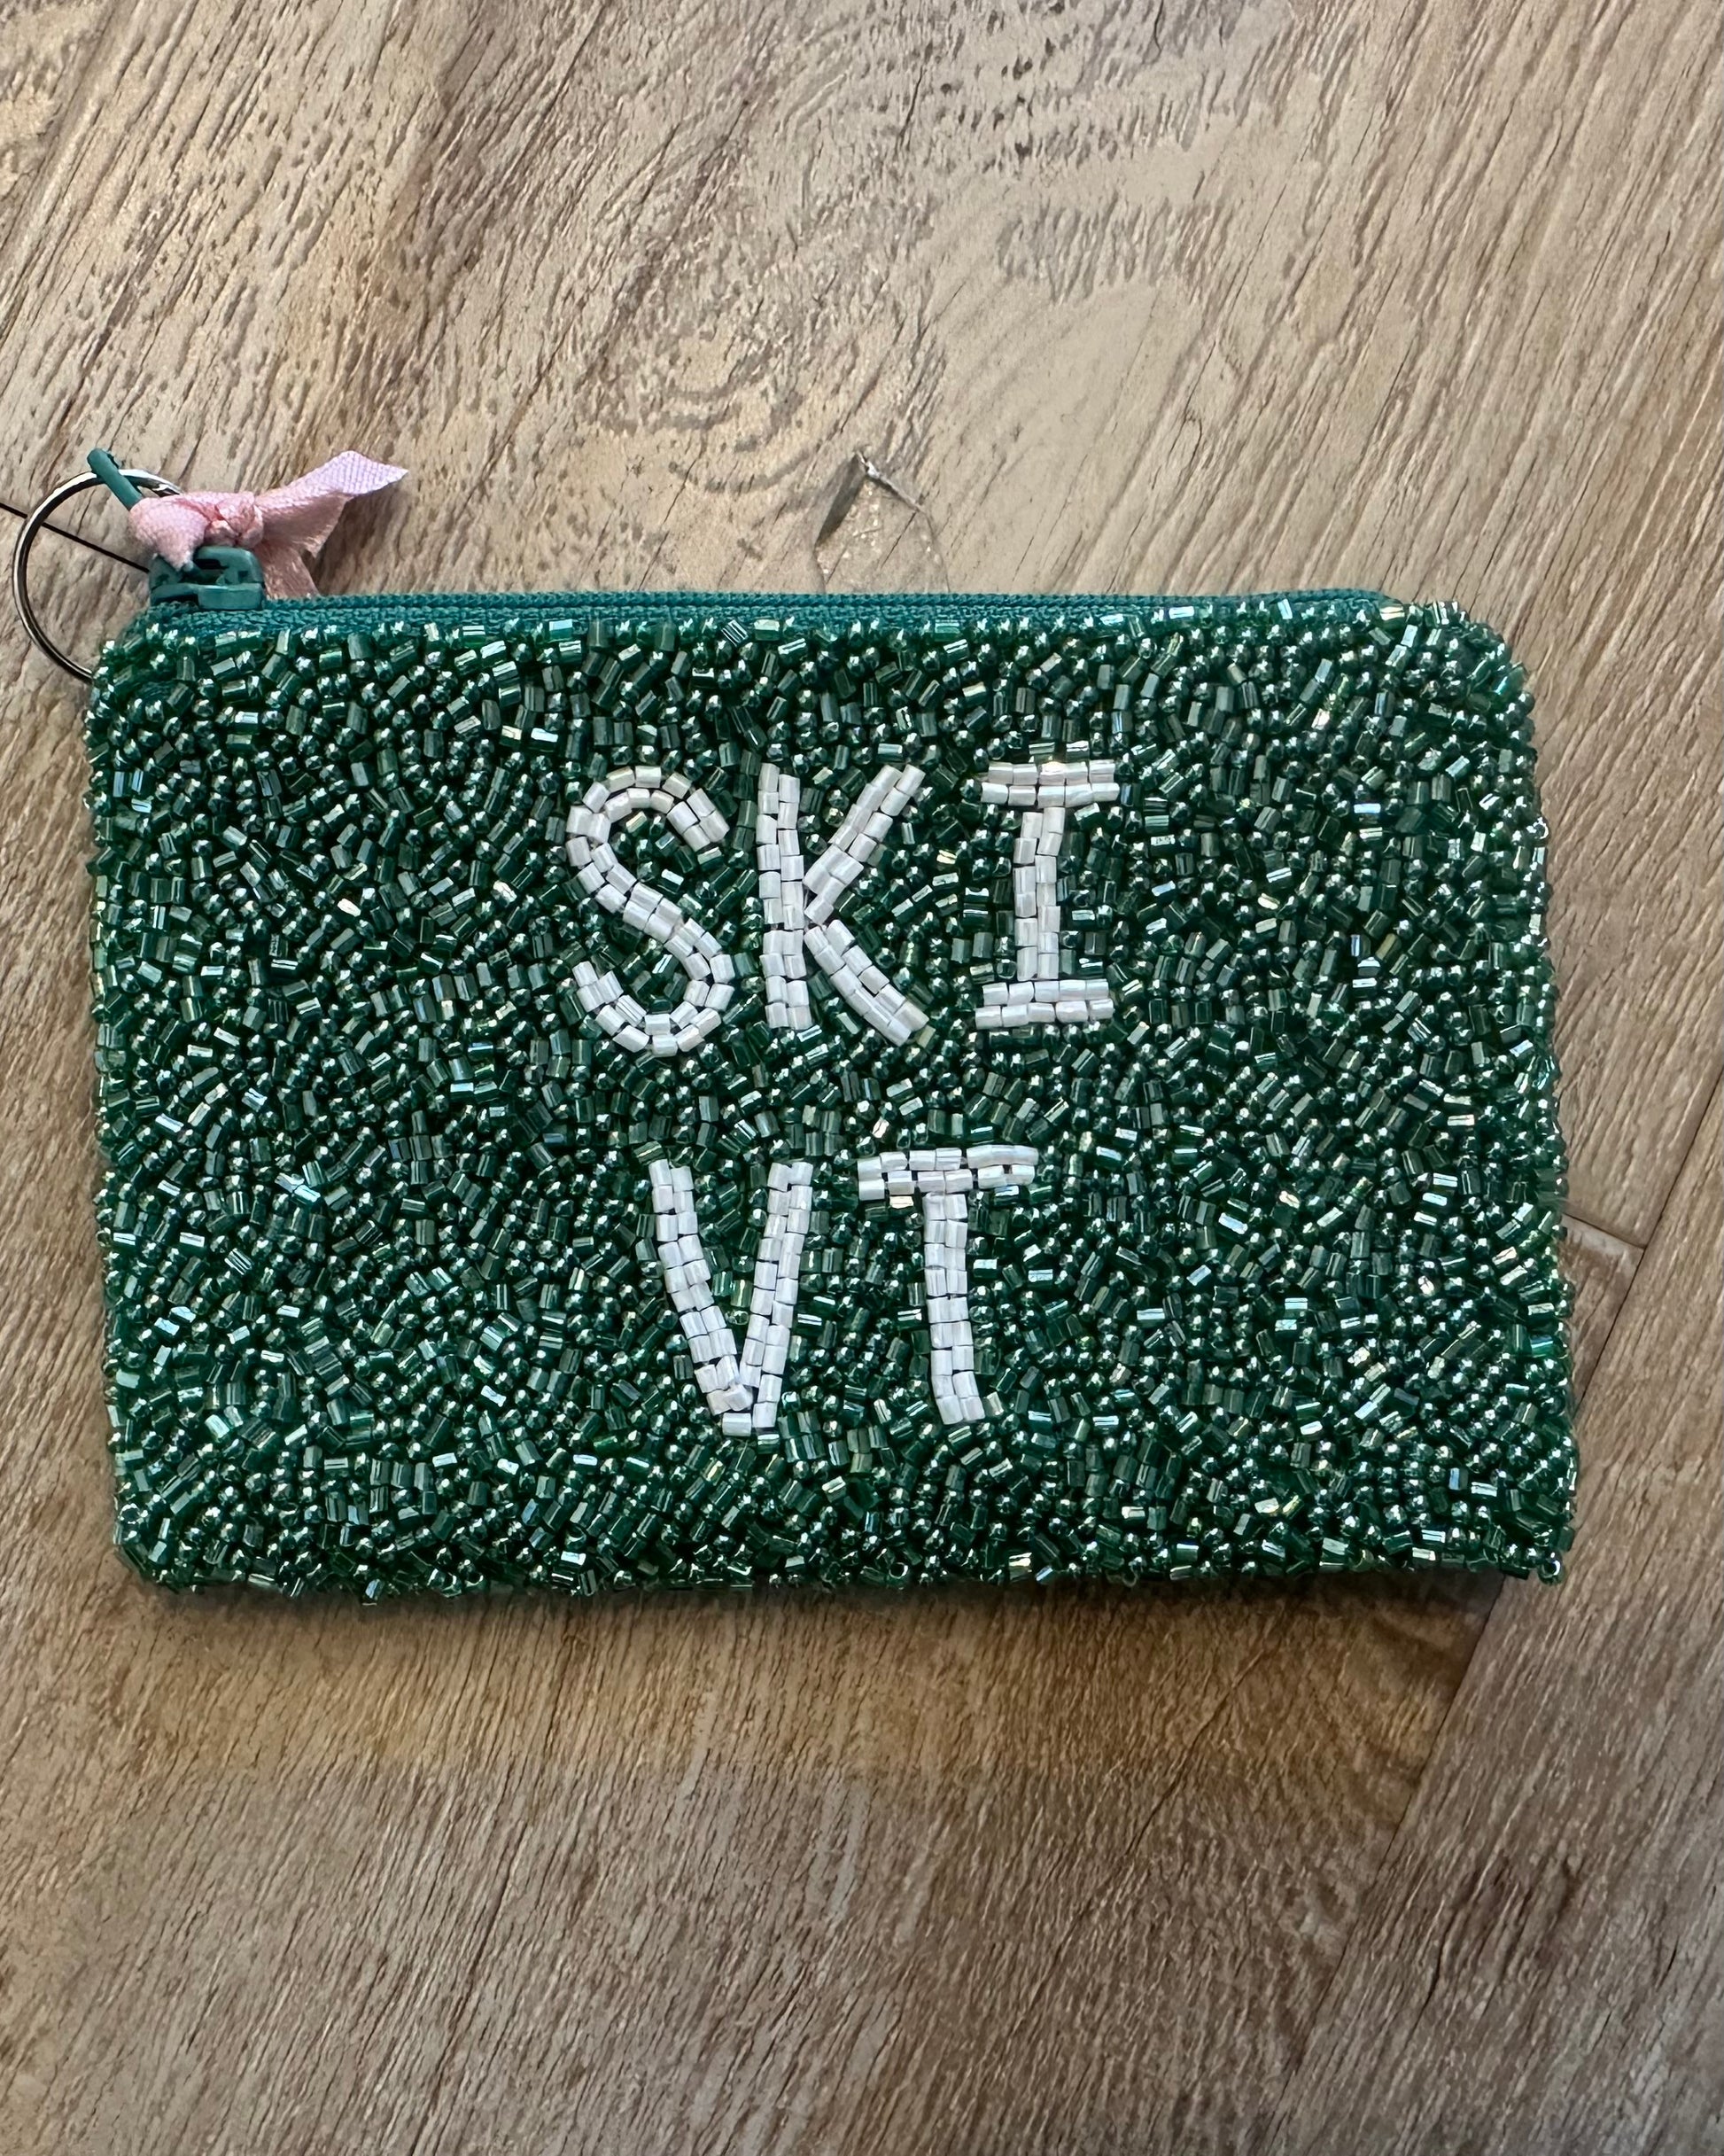 Image of ski Vermont in green and white on a wood background